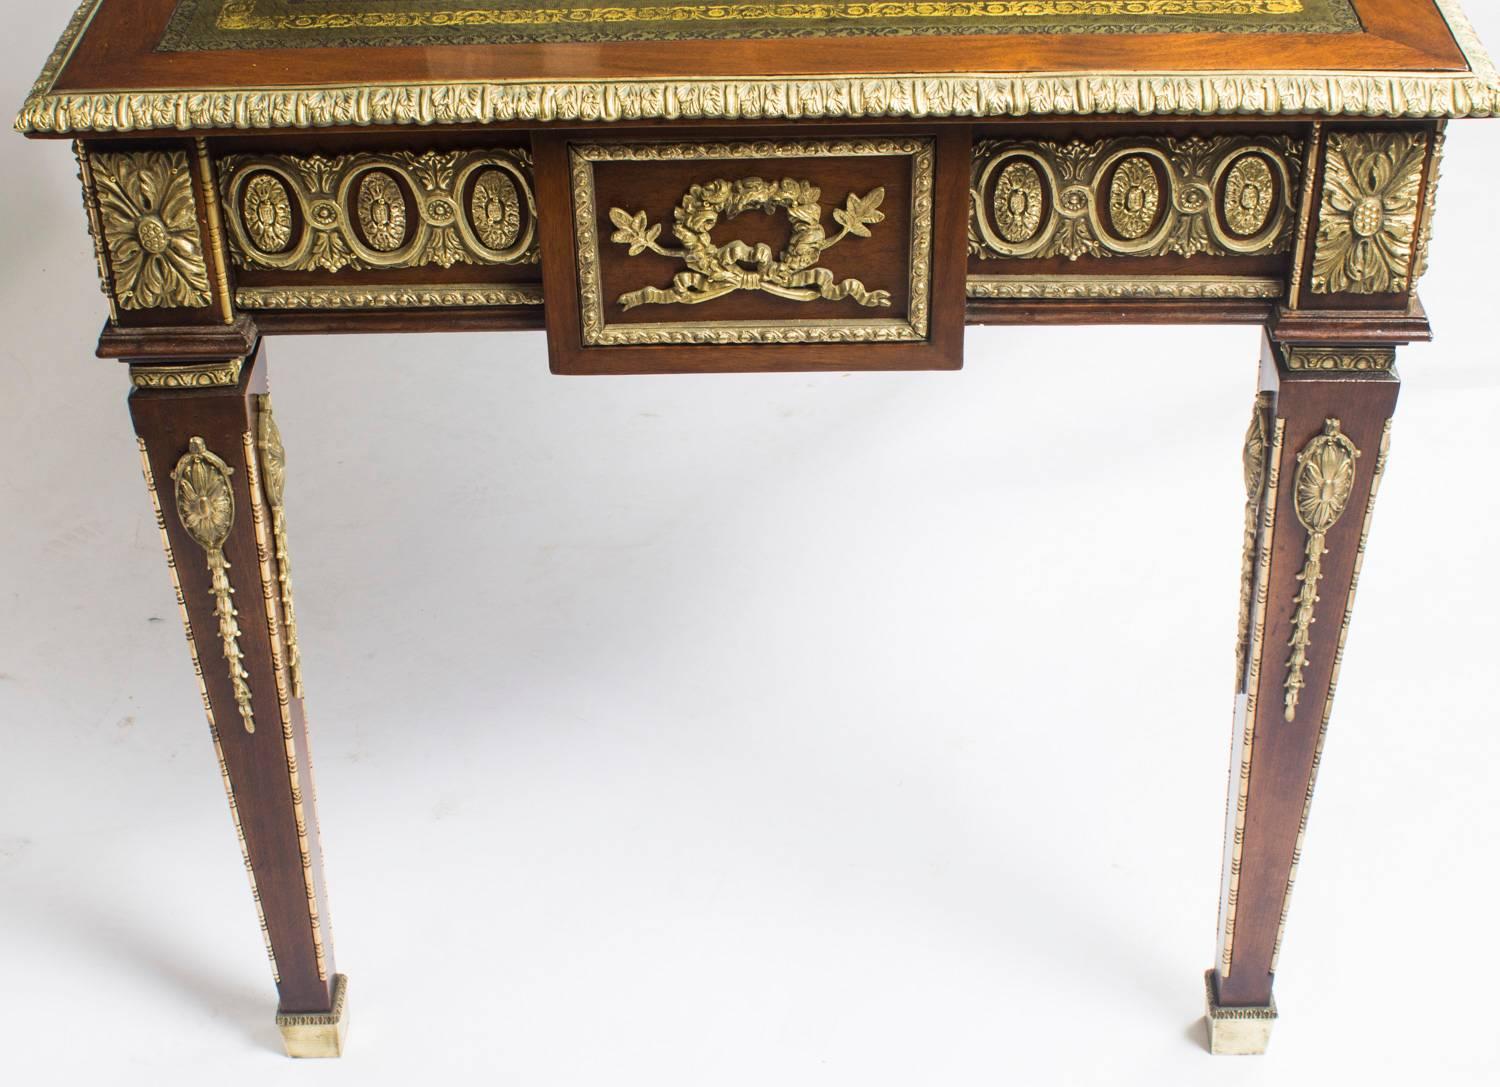 Early 20th Century French Empire Revival Bureau Plat Desk Writing Table 2